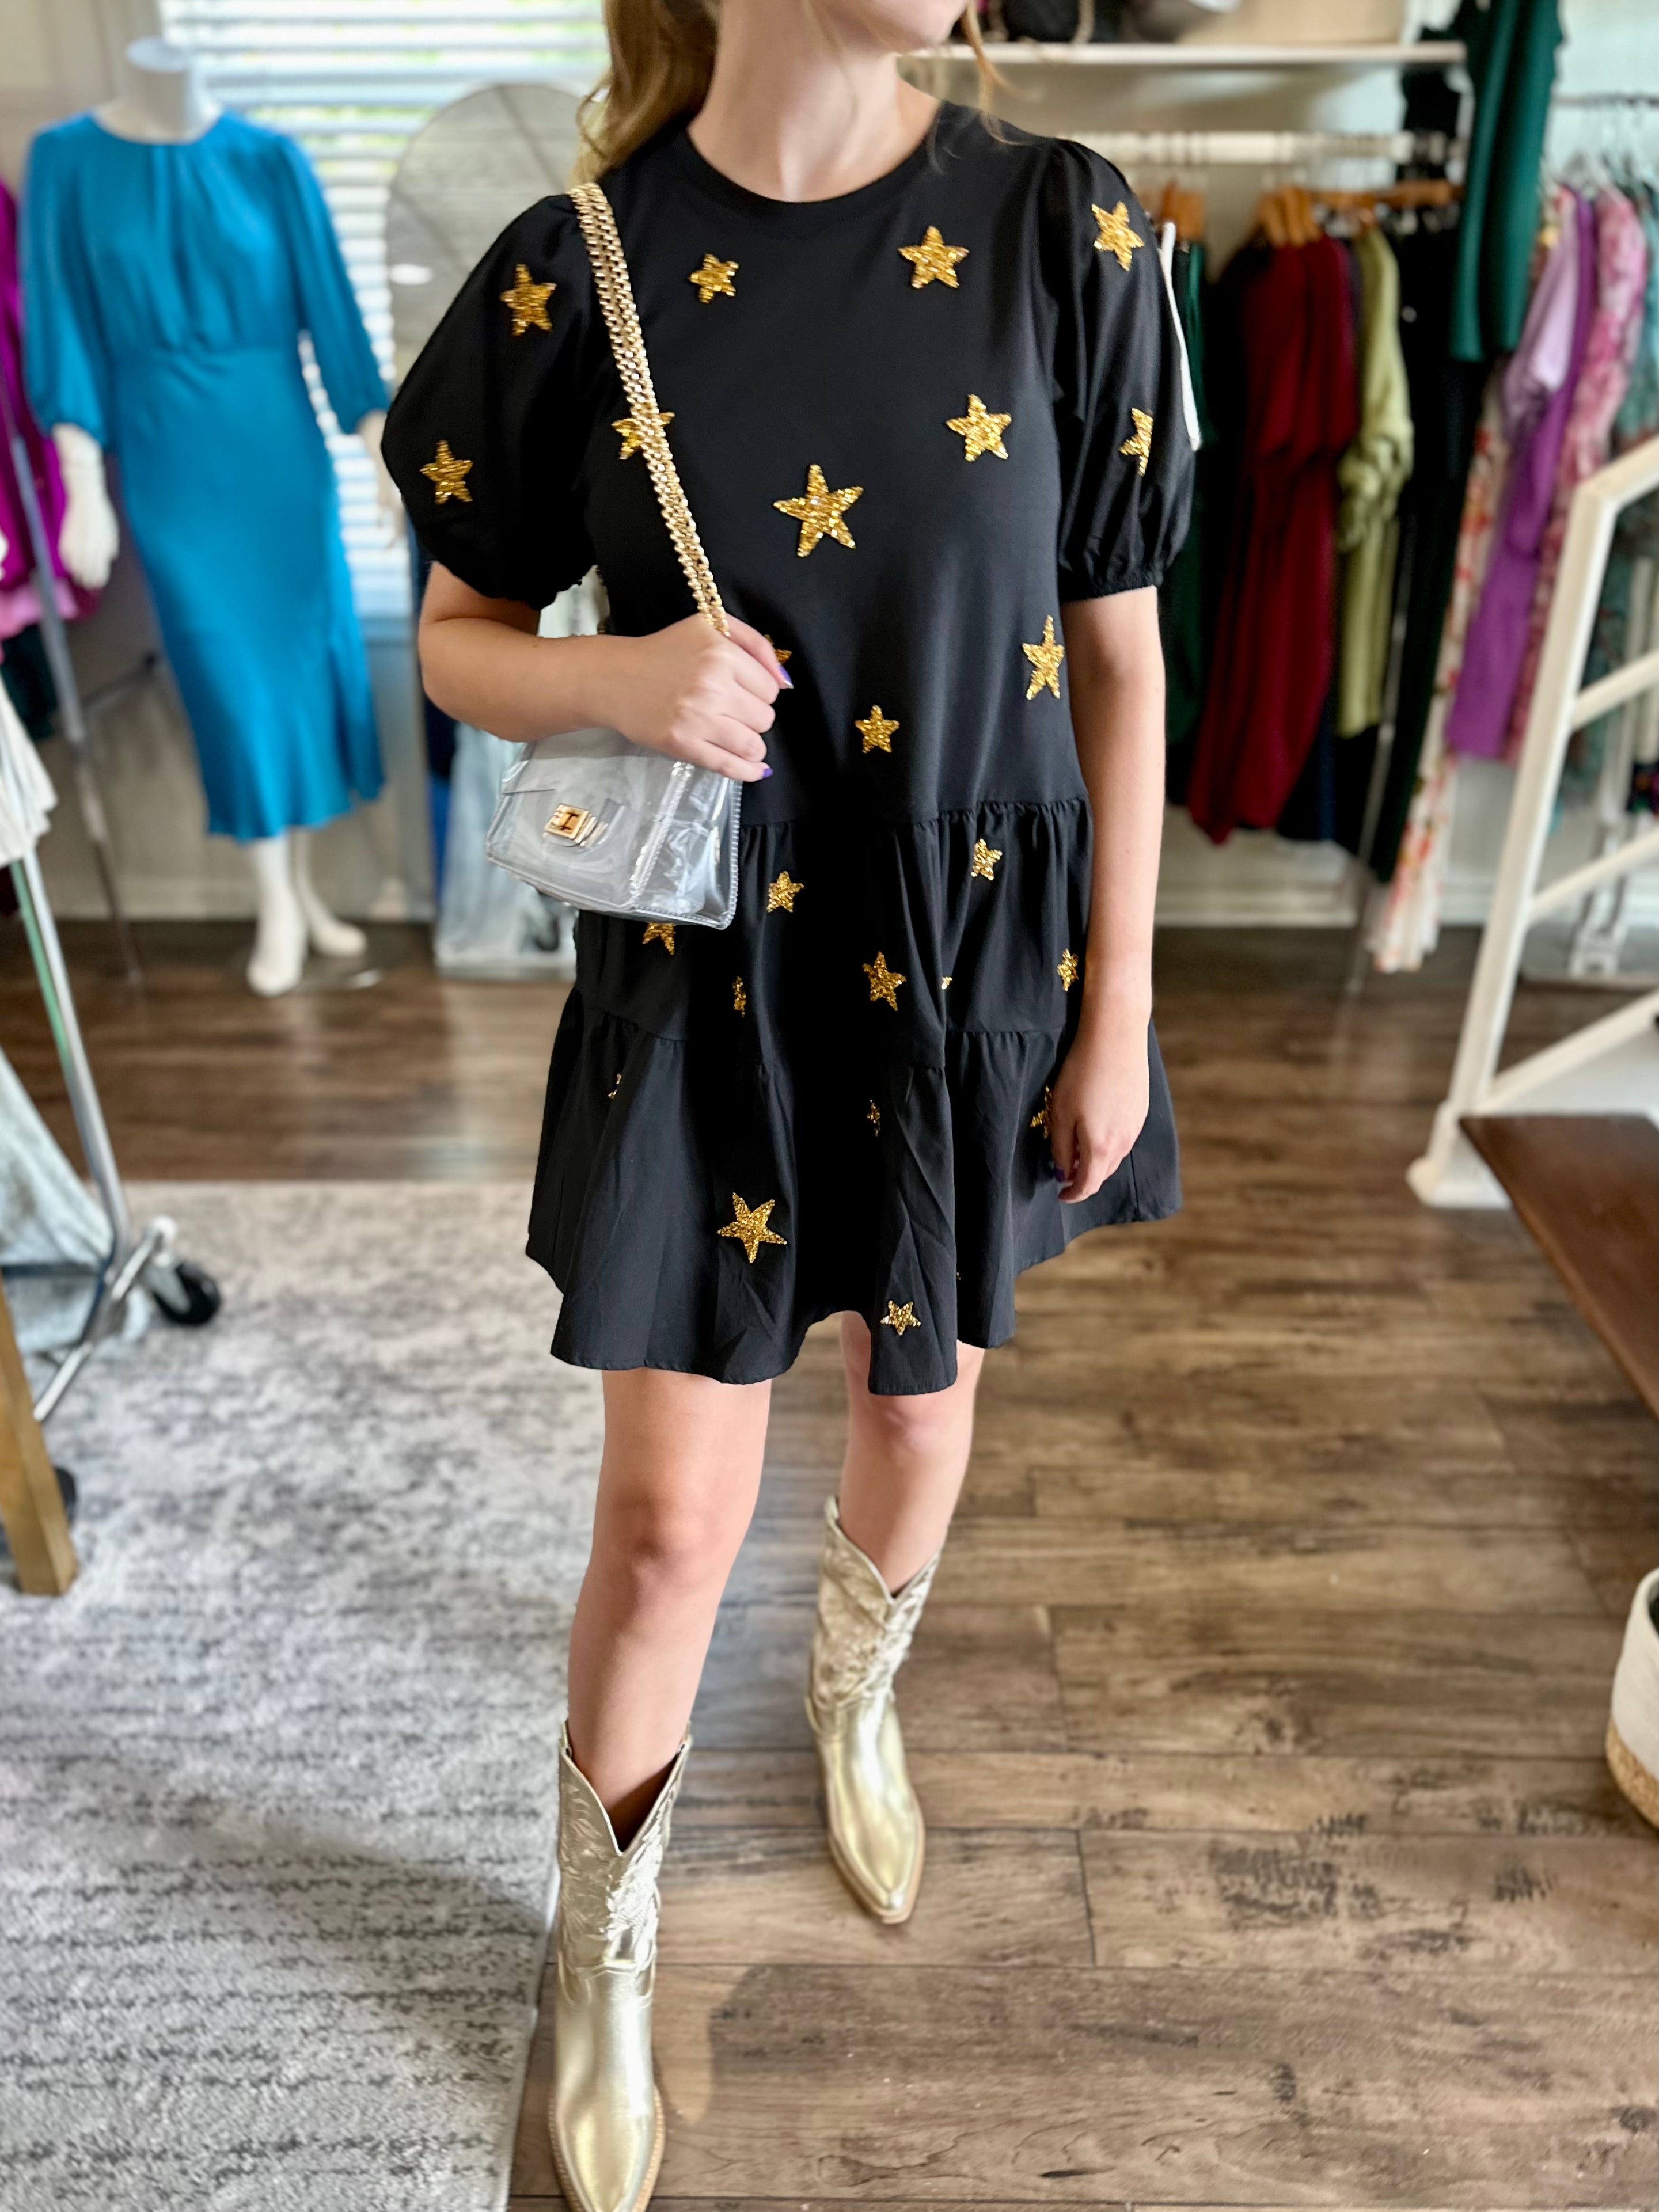 Black and Gold Star Dress